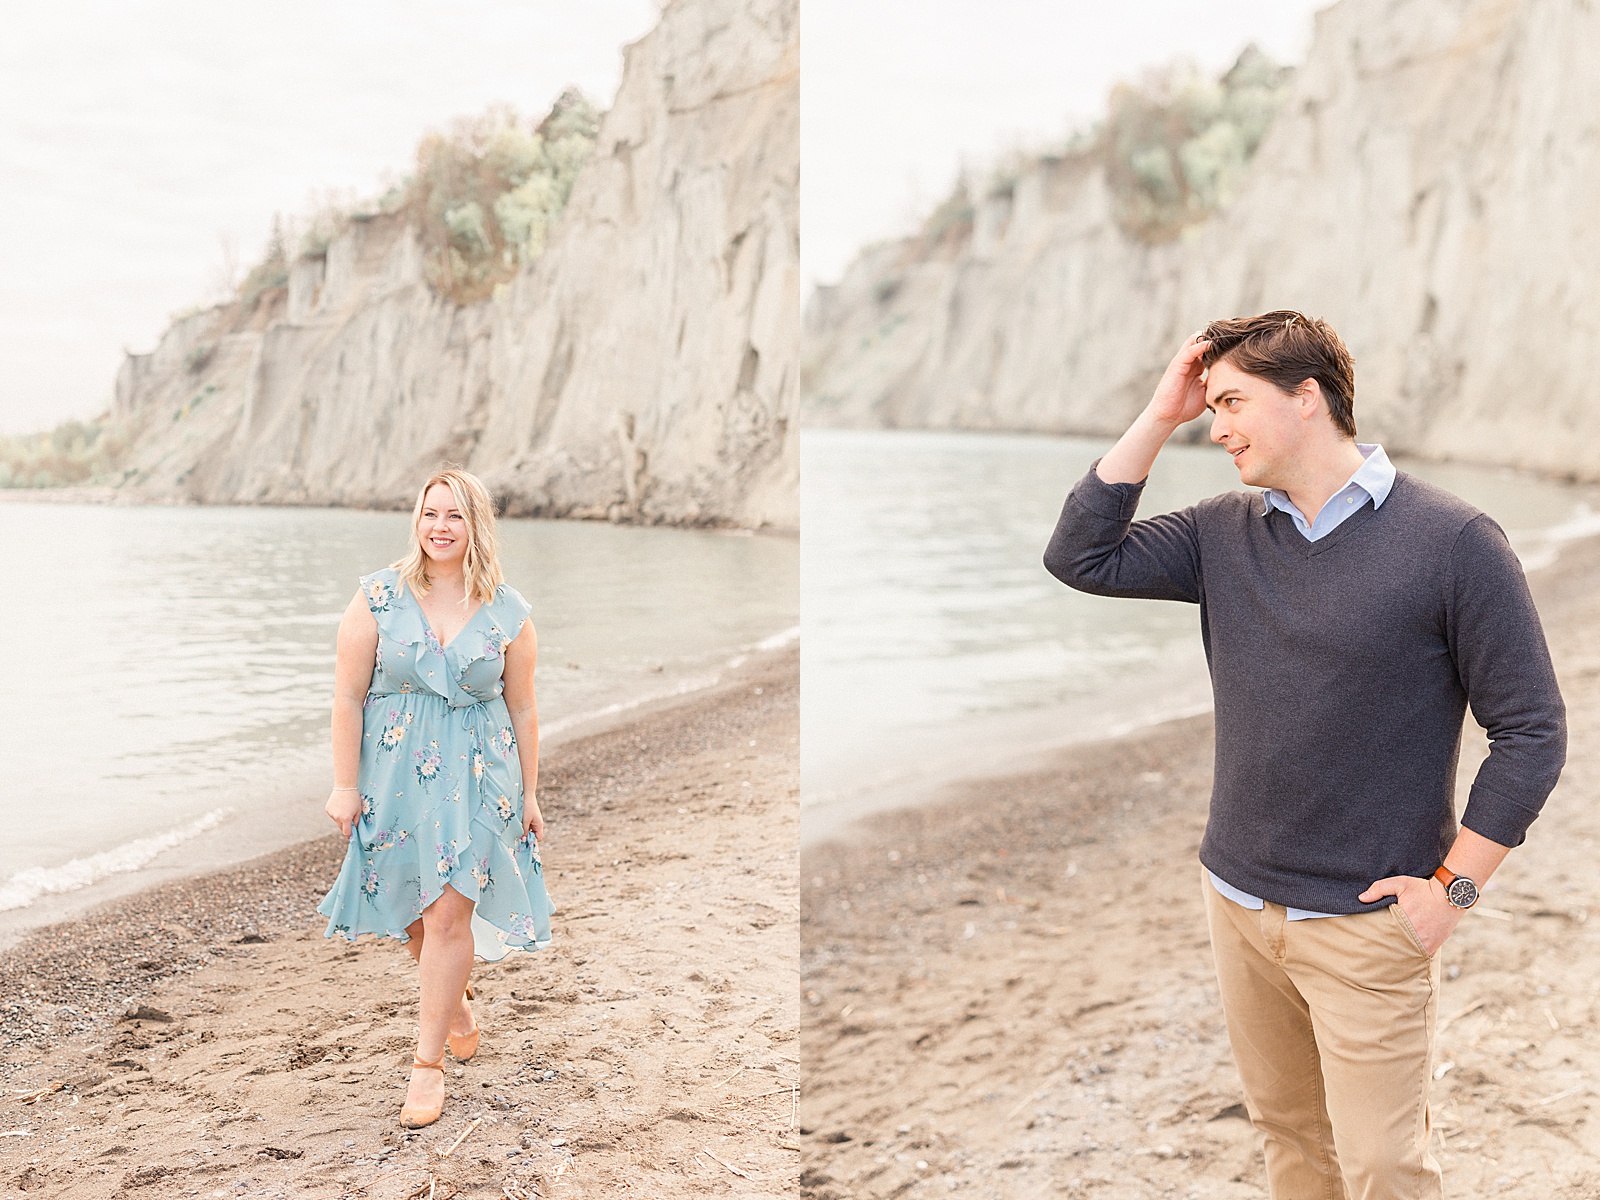 Scarborough Bluffs Engagement Session in the Spring Time